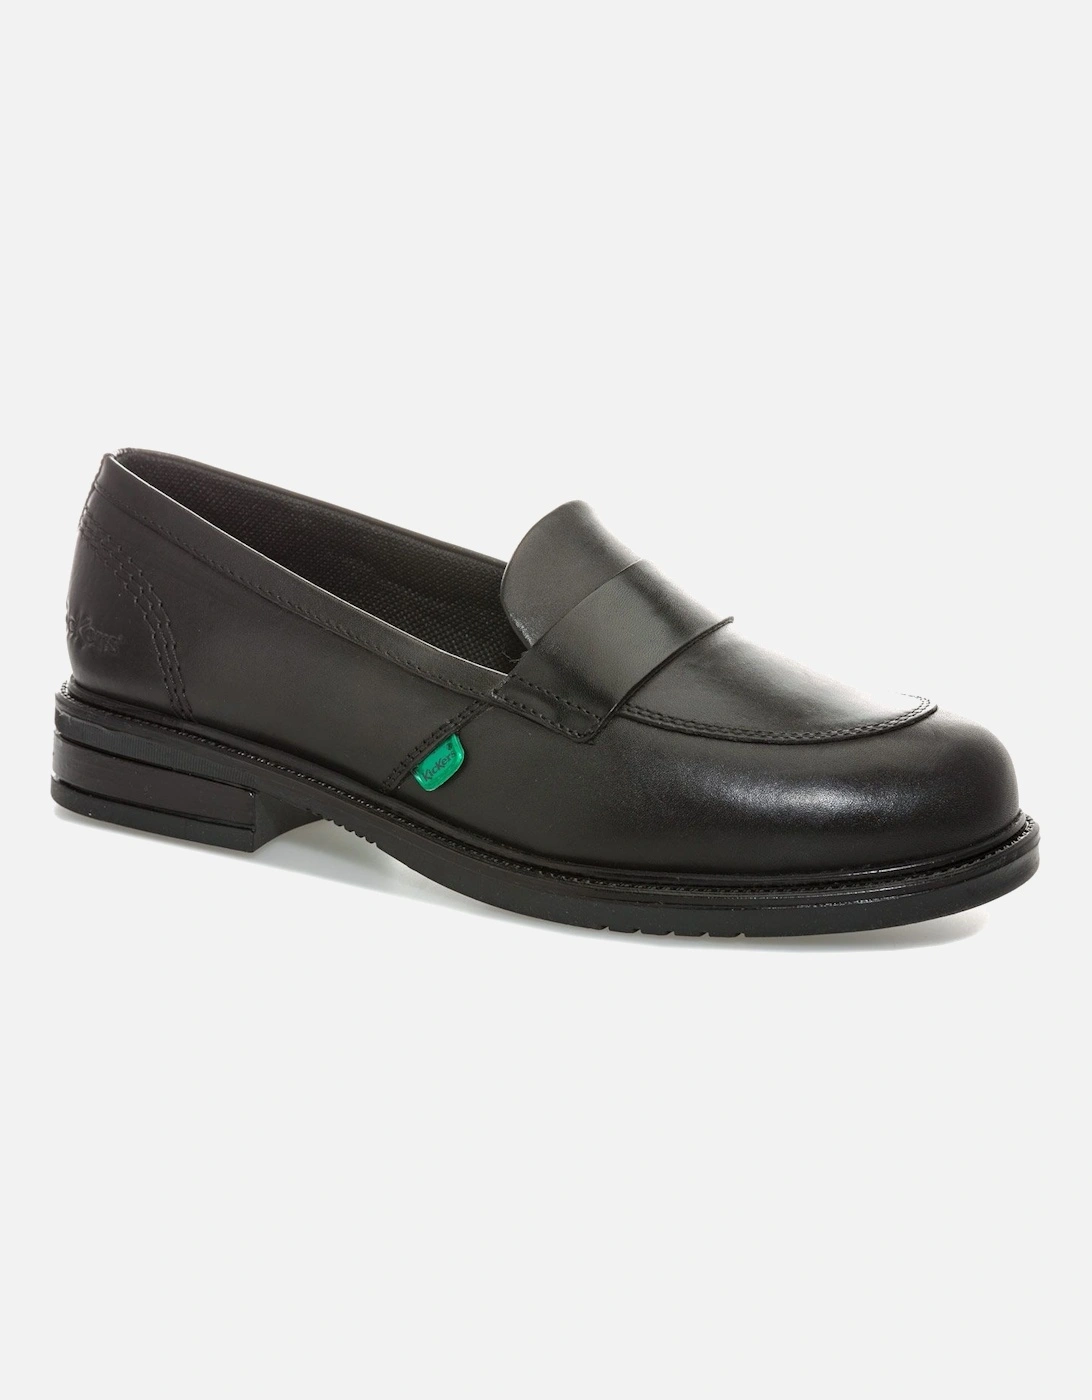 Lach Loafer Shoes - Womens Lach Loafer Shoes